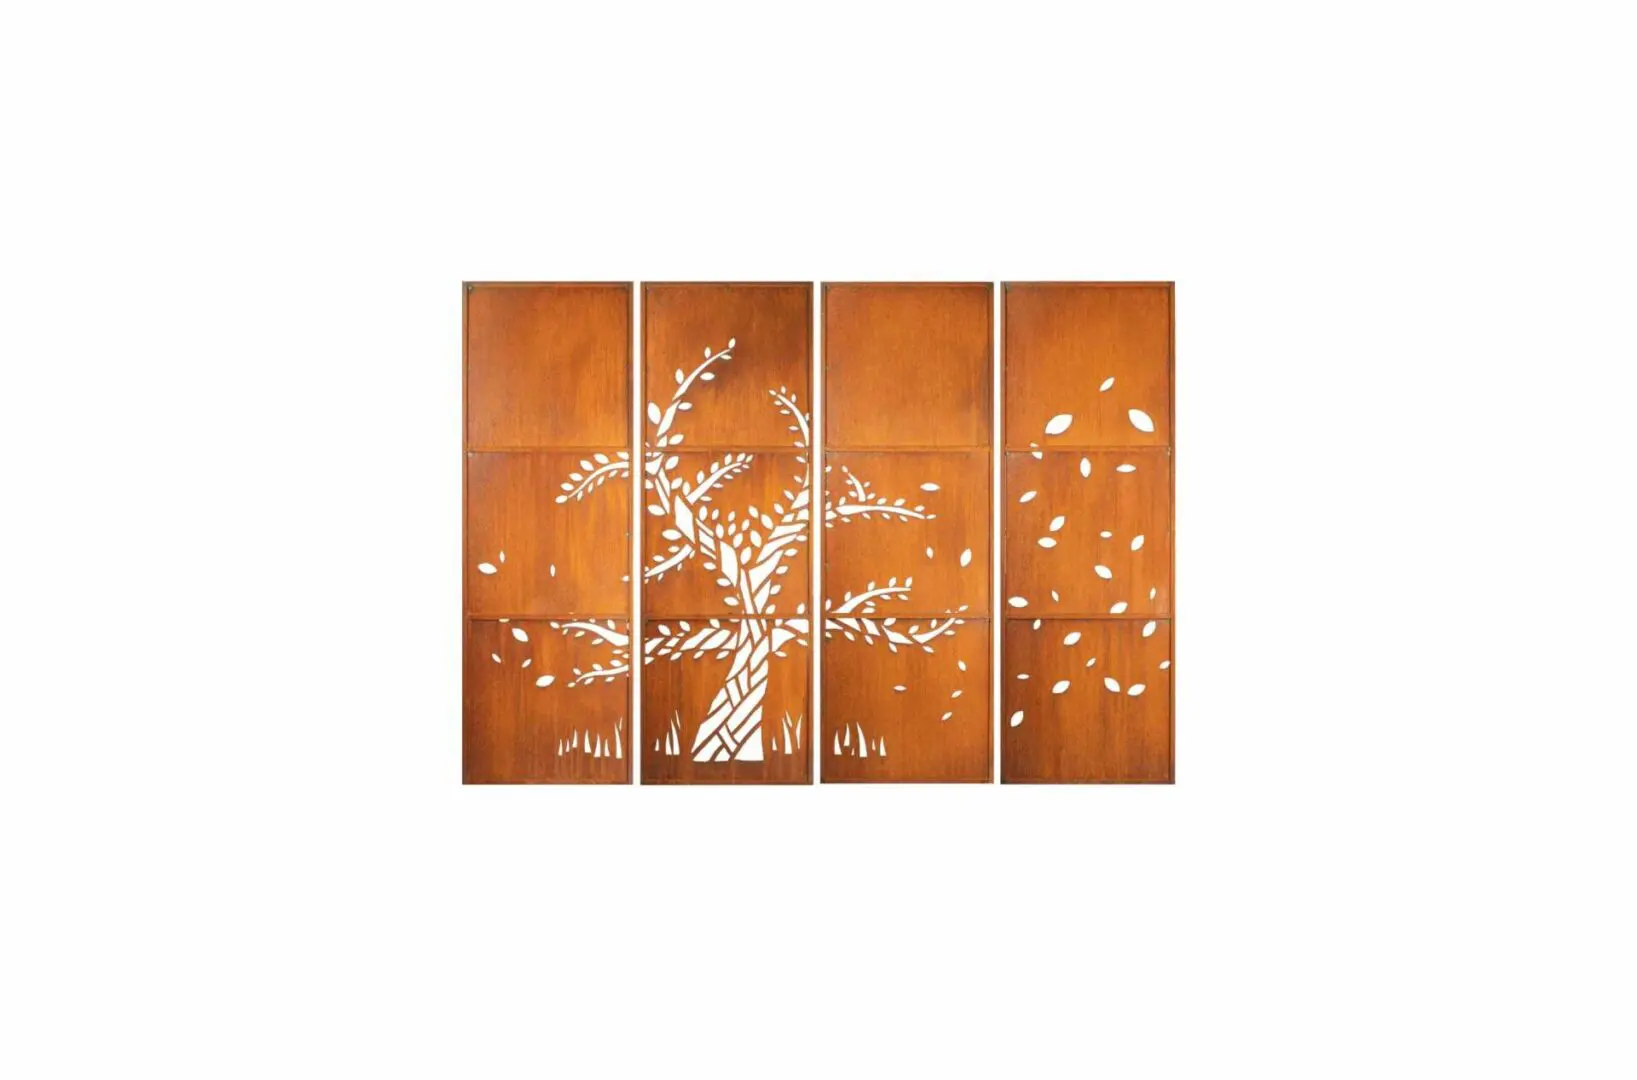 Privacy Screens, Tree, and Falling Leaves metal art